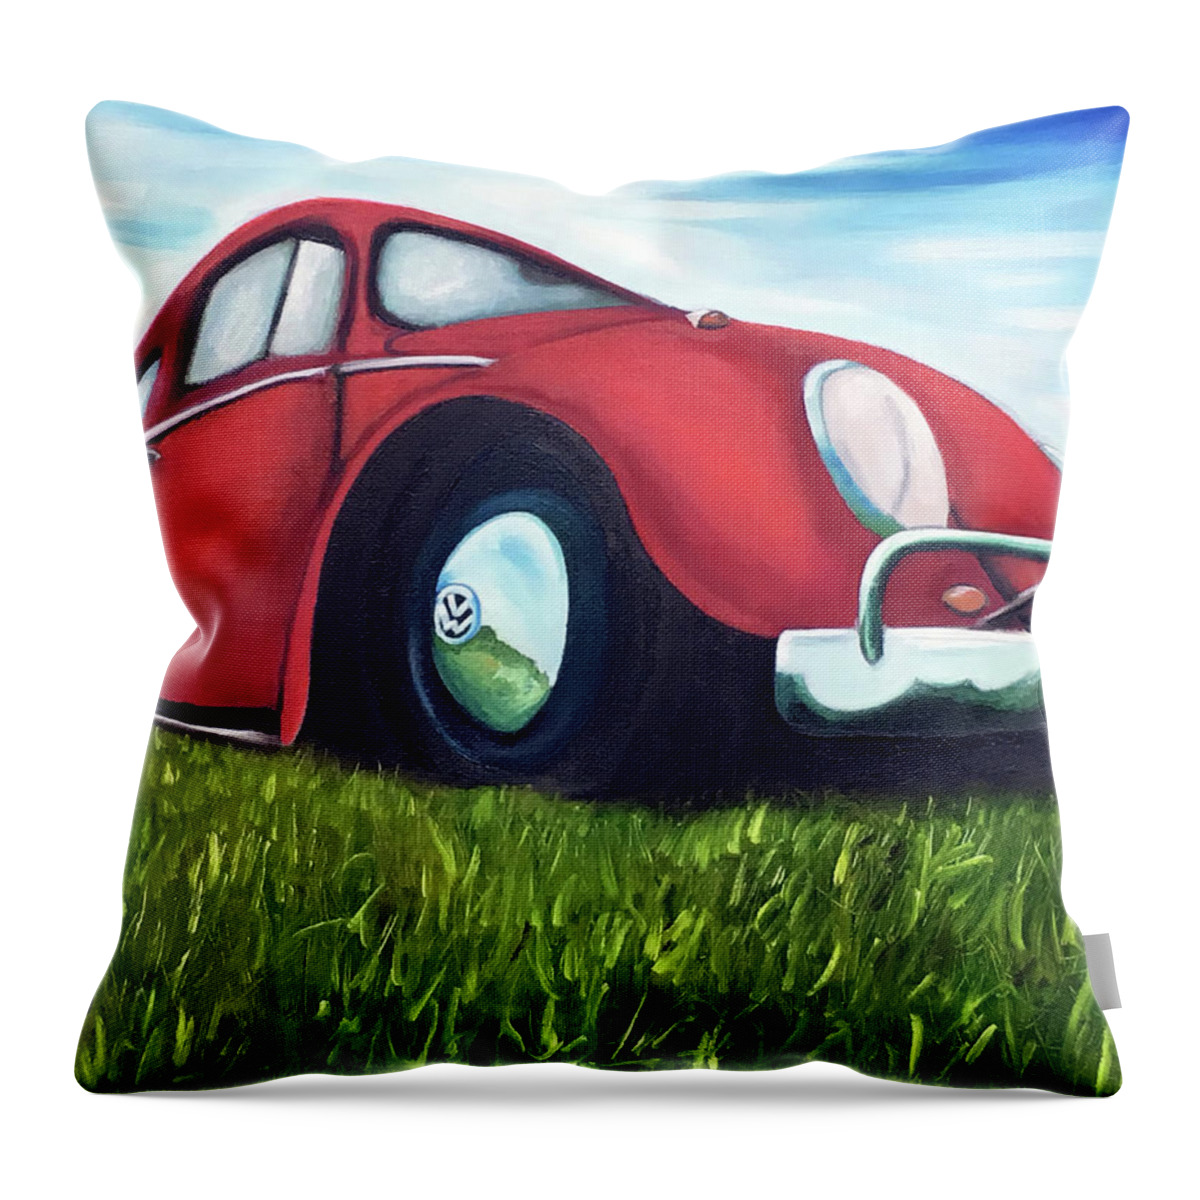 Glorso Throw Pillow featuring the painting Red VW by Dean Glorso